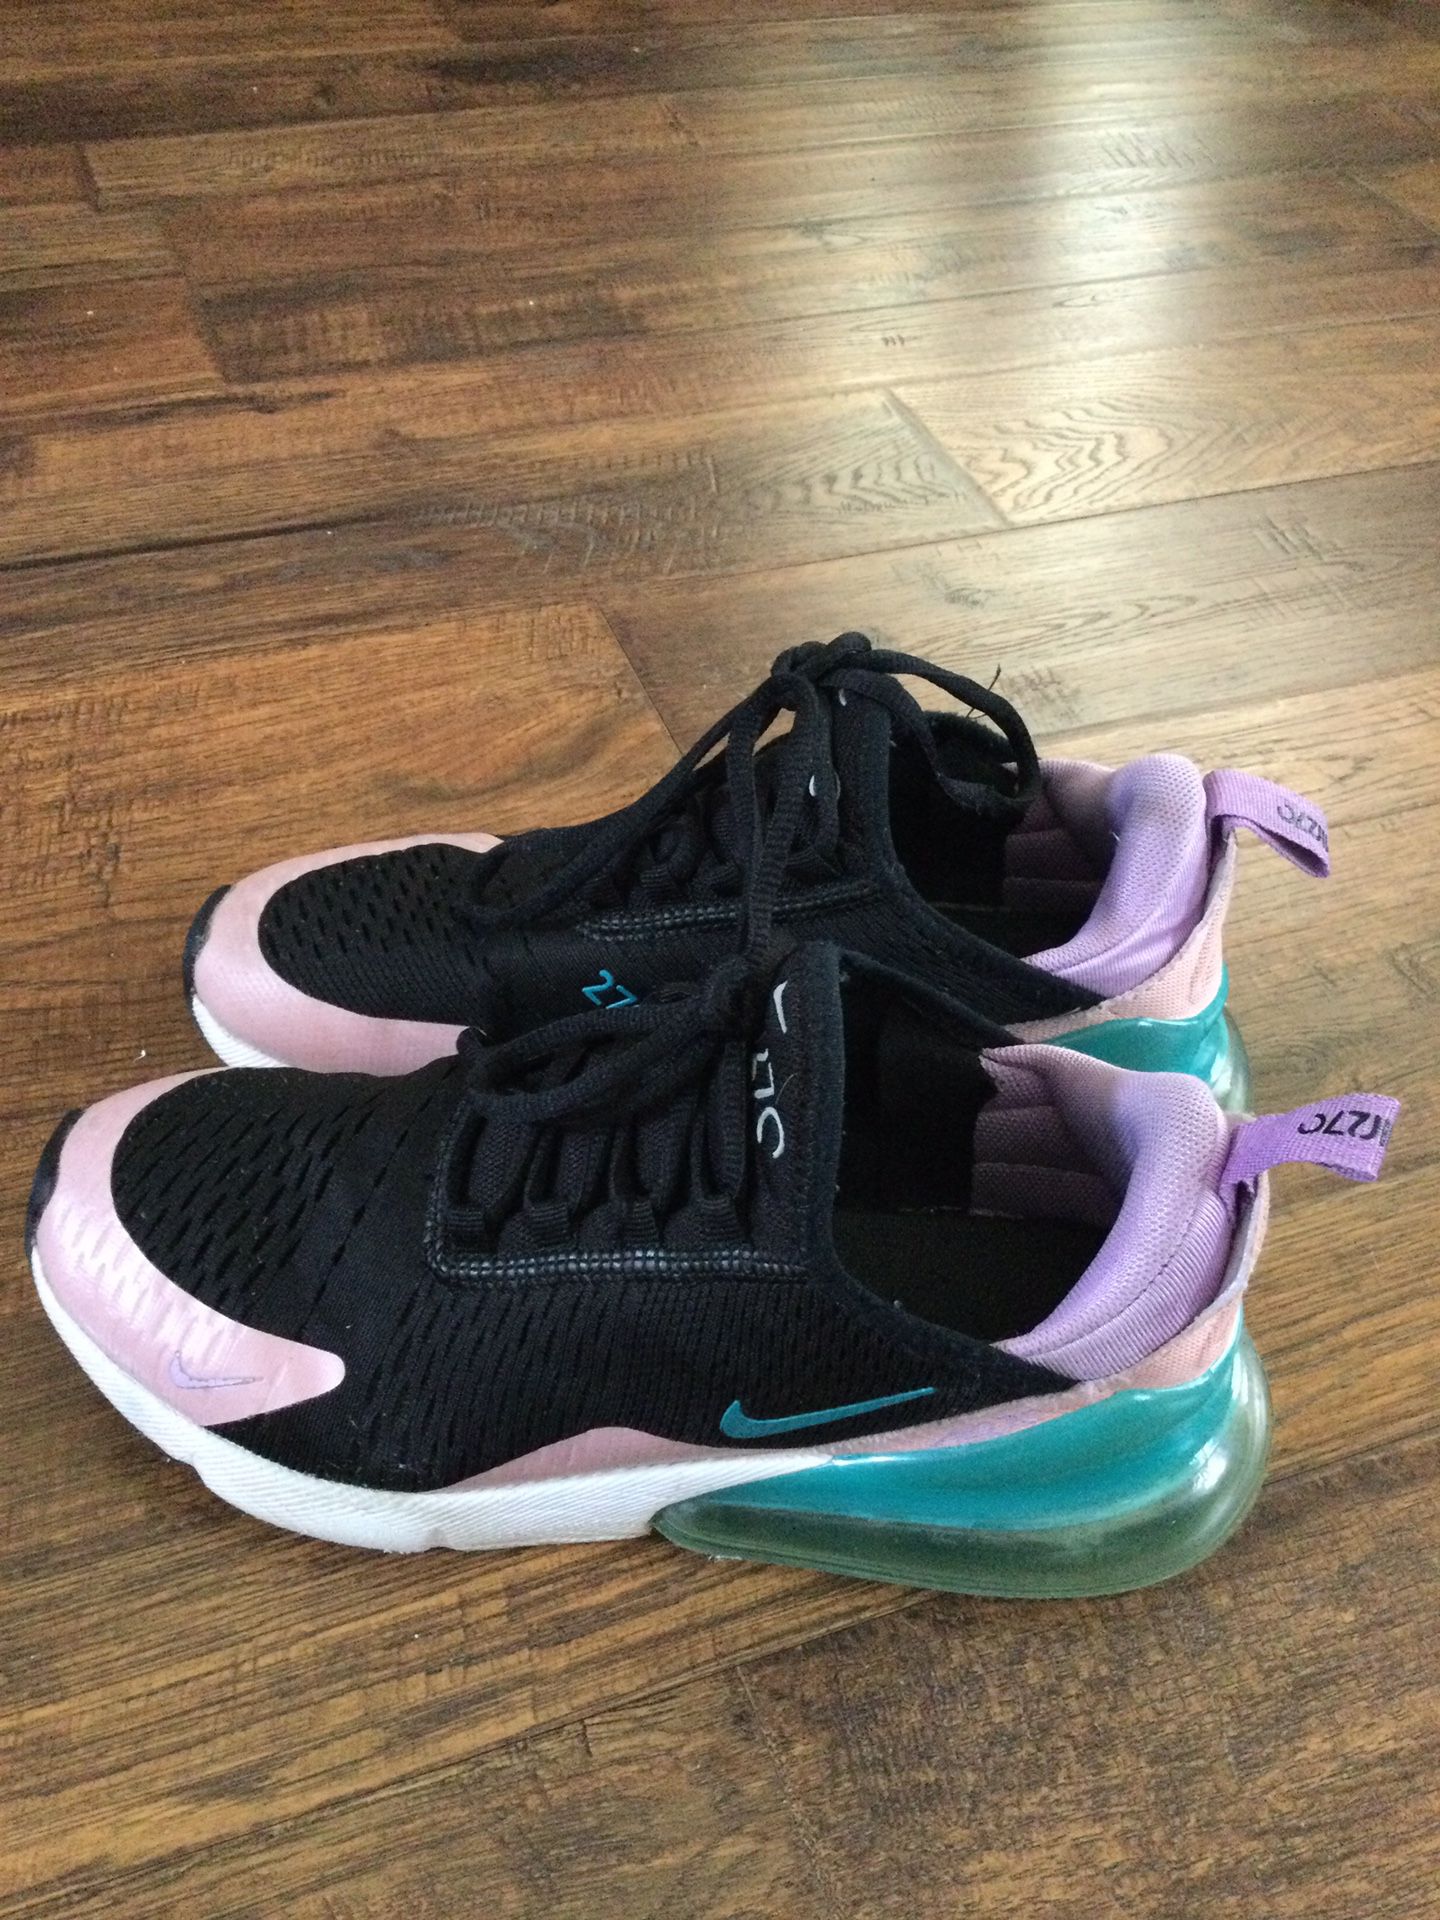 Nike Air Max 270 Have a Nike day men sneakers